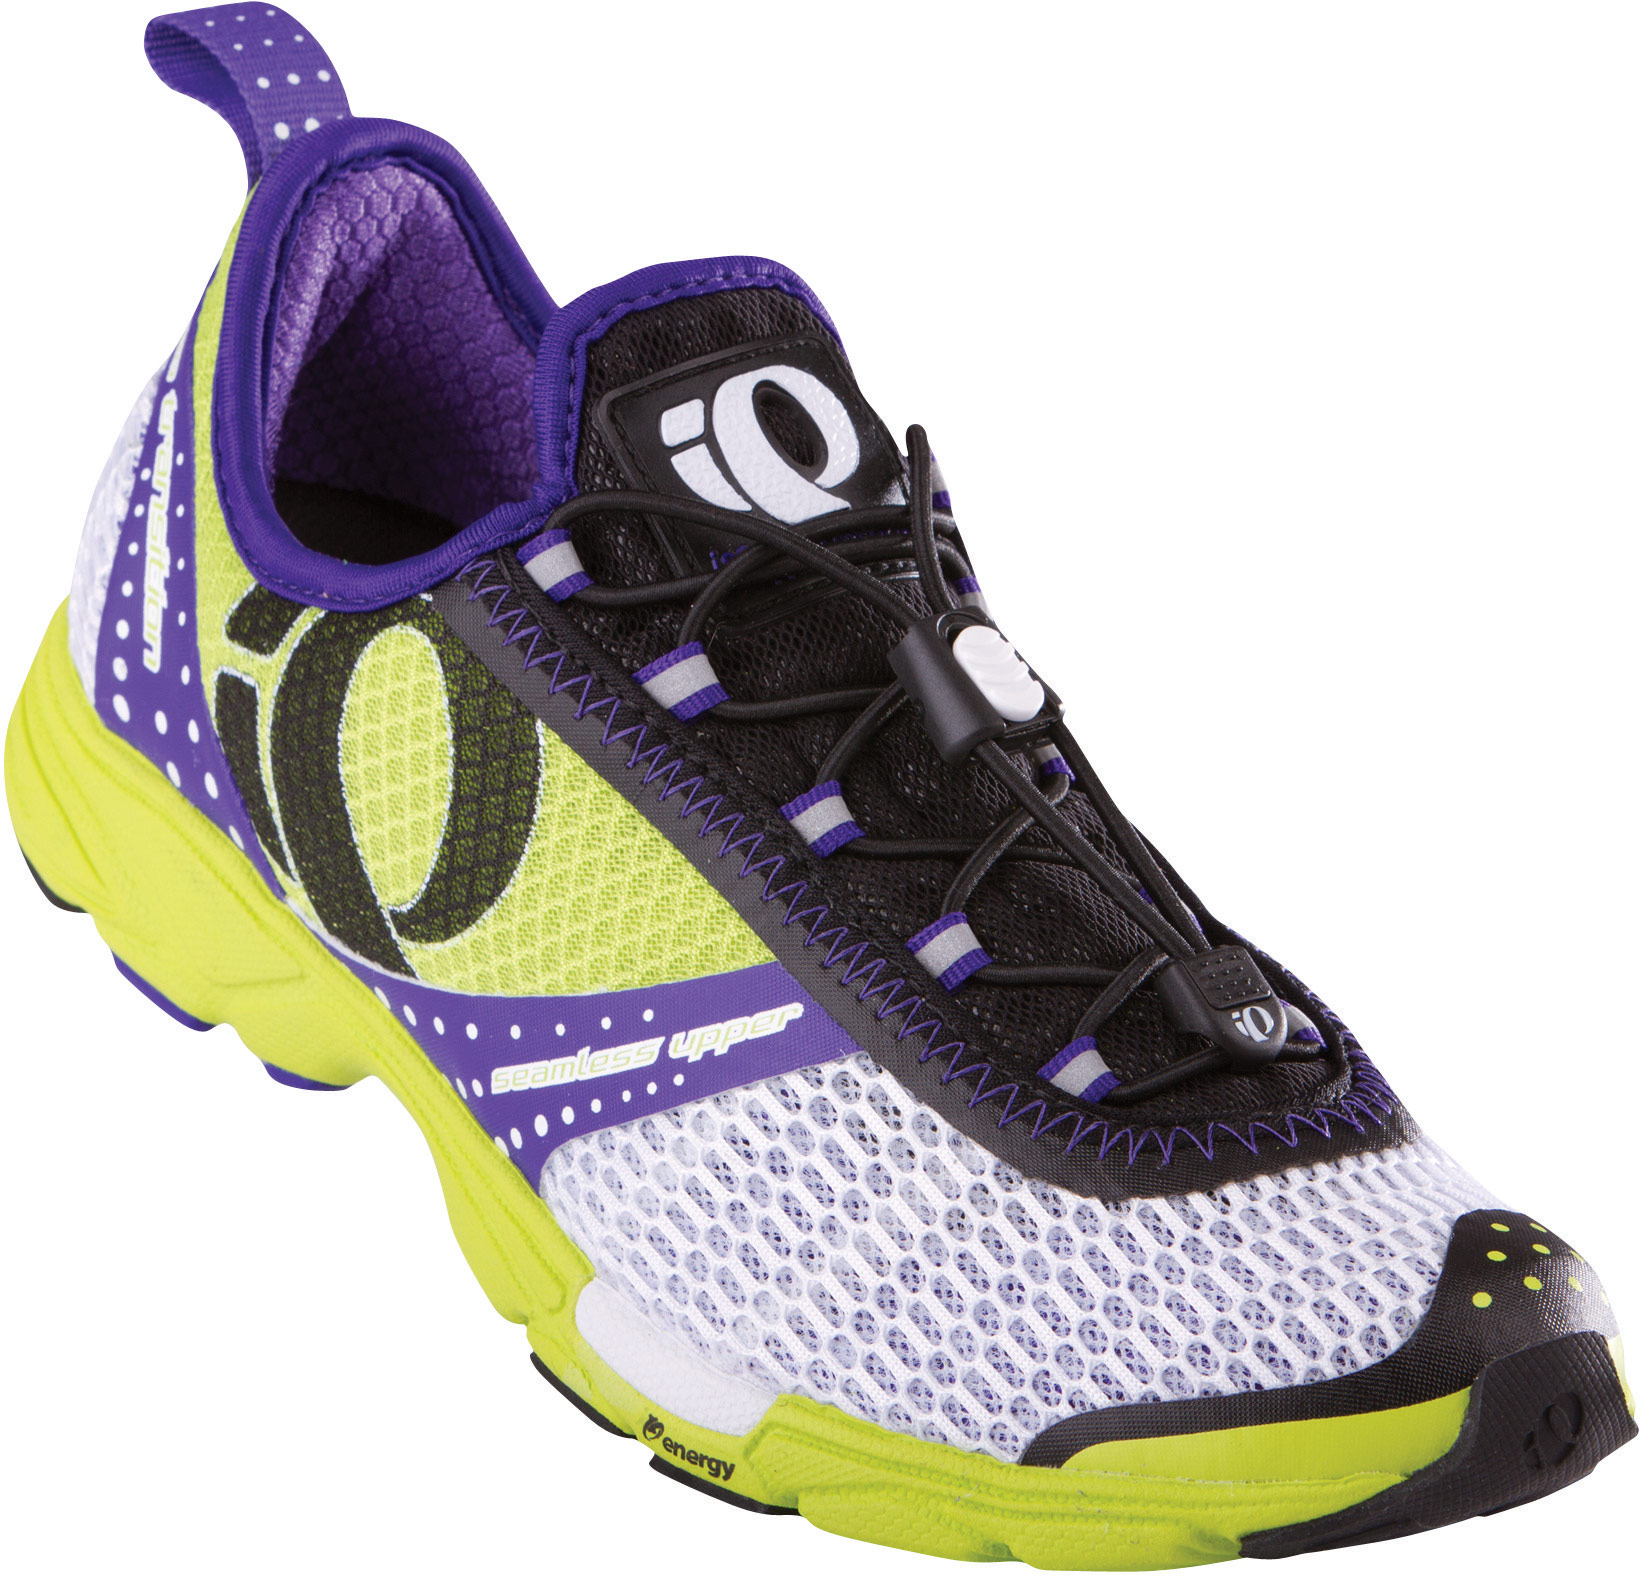 questionnaire Drive away Albany Pearl Izumi Women's isoTransition Running Shoes - Towpath Bike, Rochester  New York's Premier Bike Shop since 1971.